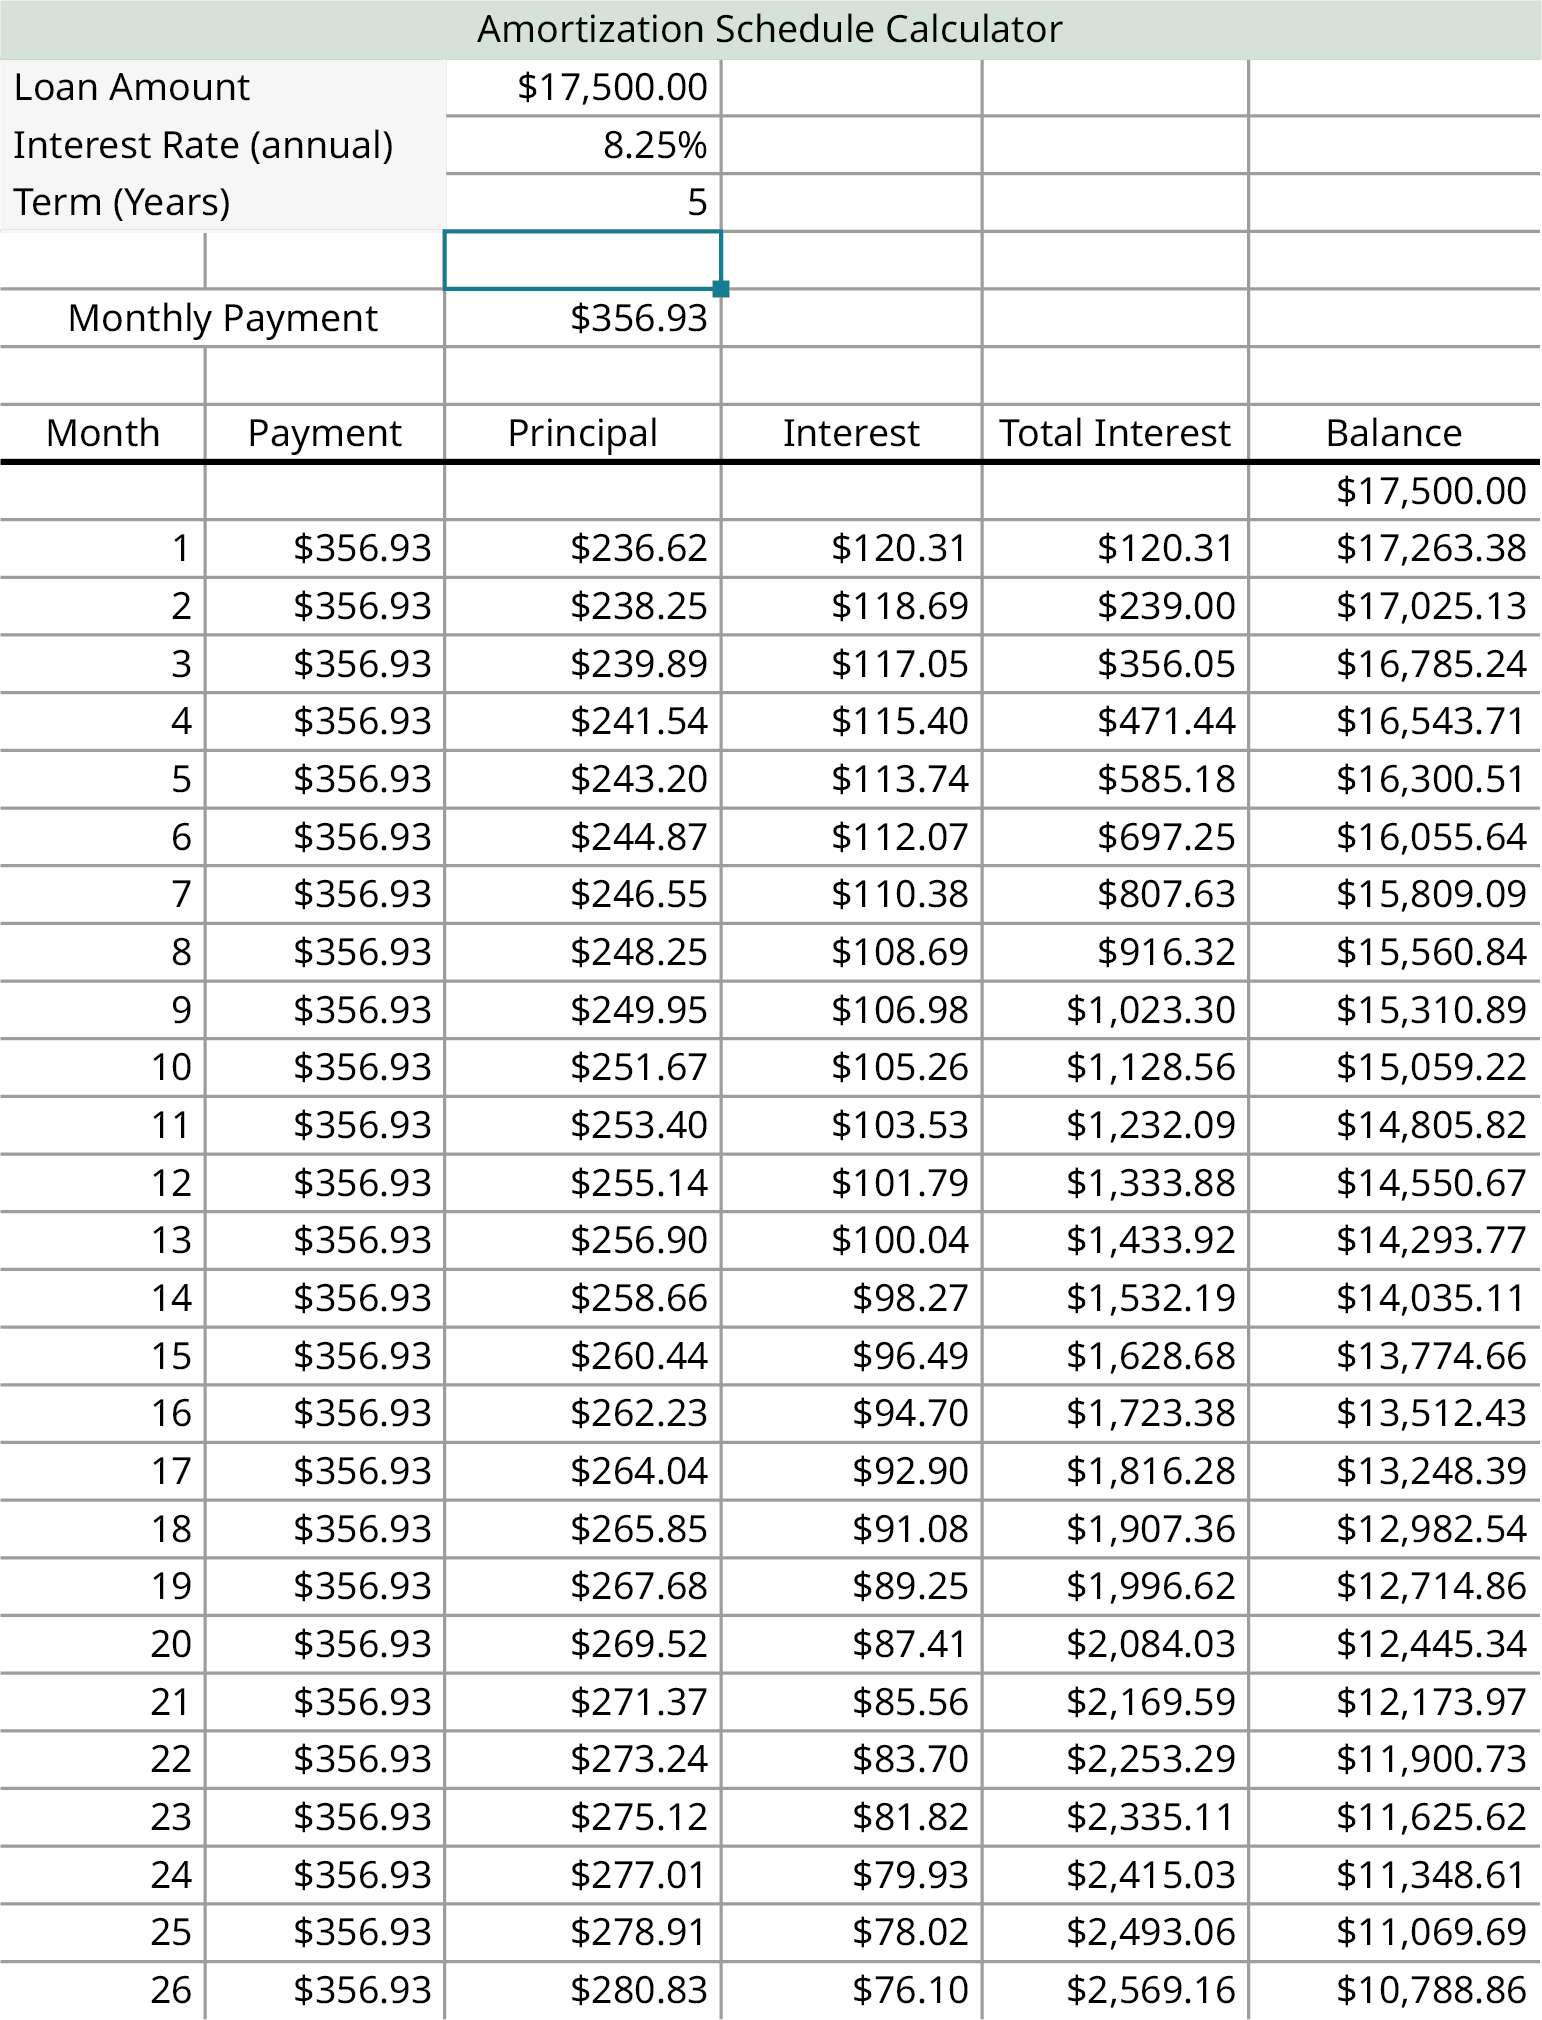 A spreadsheet labeled as amortization schedule calculator. The sheet calculates the repayment for the loan amount of $17,500.00 for an interest rate of 8.25 percent annually and the monthly payment is $356.93. The factors include calculations such as month, payment, principal, interest, total, and interest and balance.